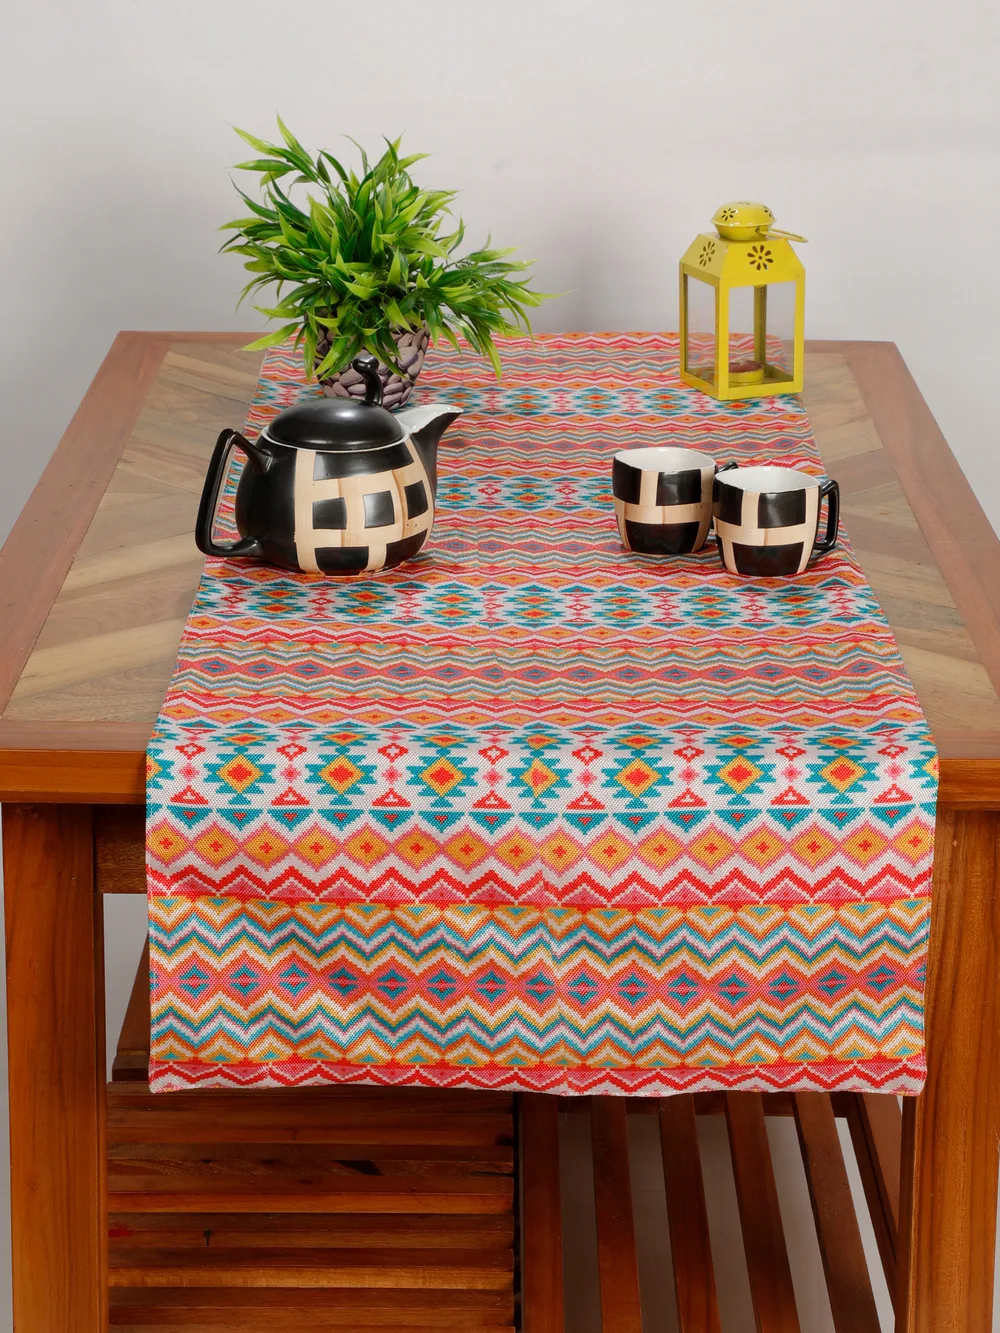 Cotton polyester printed table runner, 60x13, pink, blue, orange